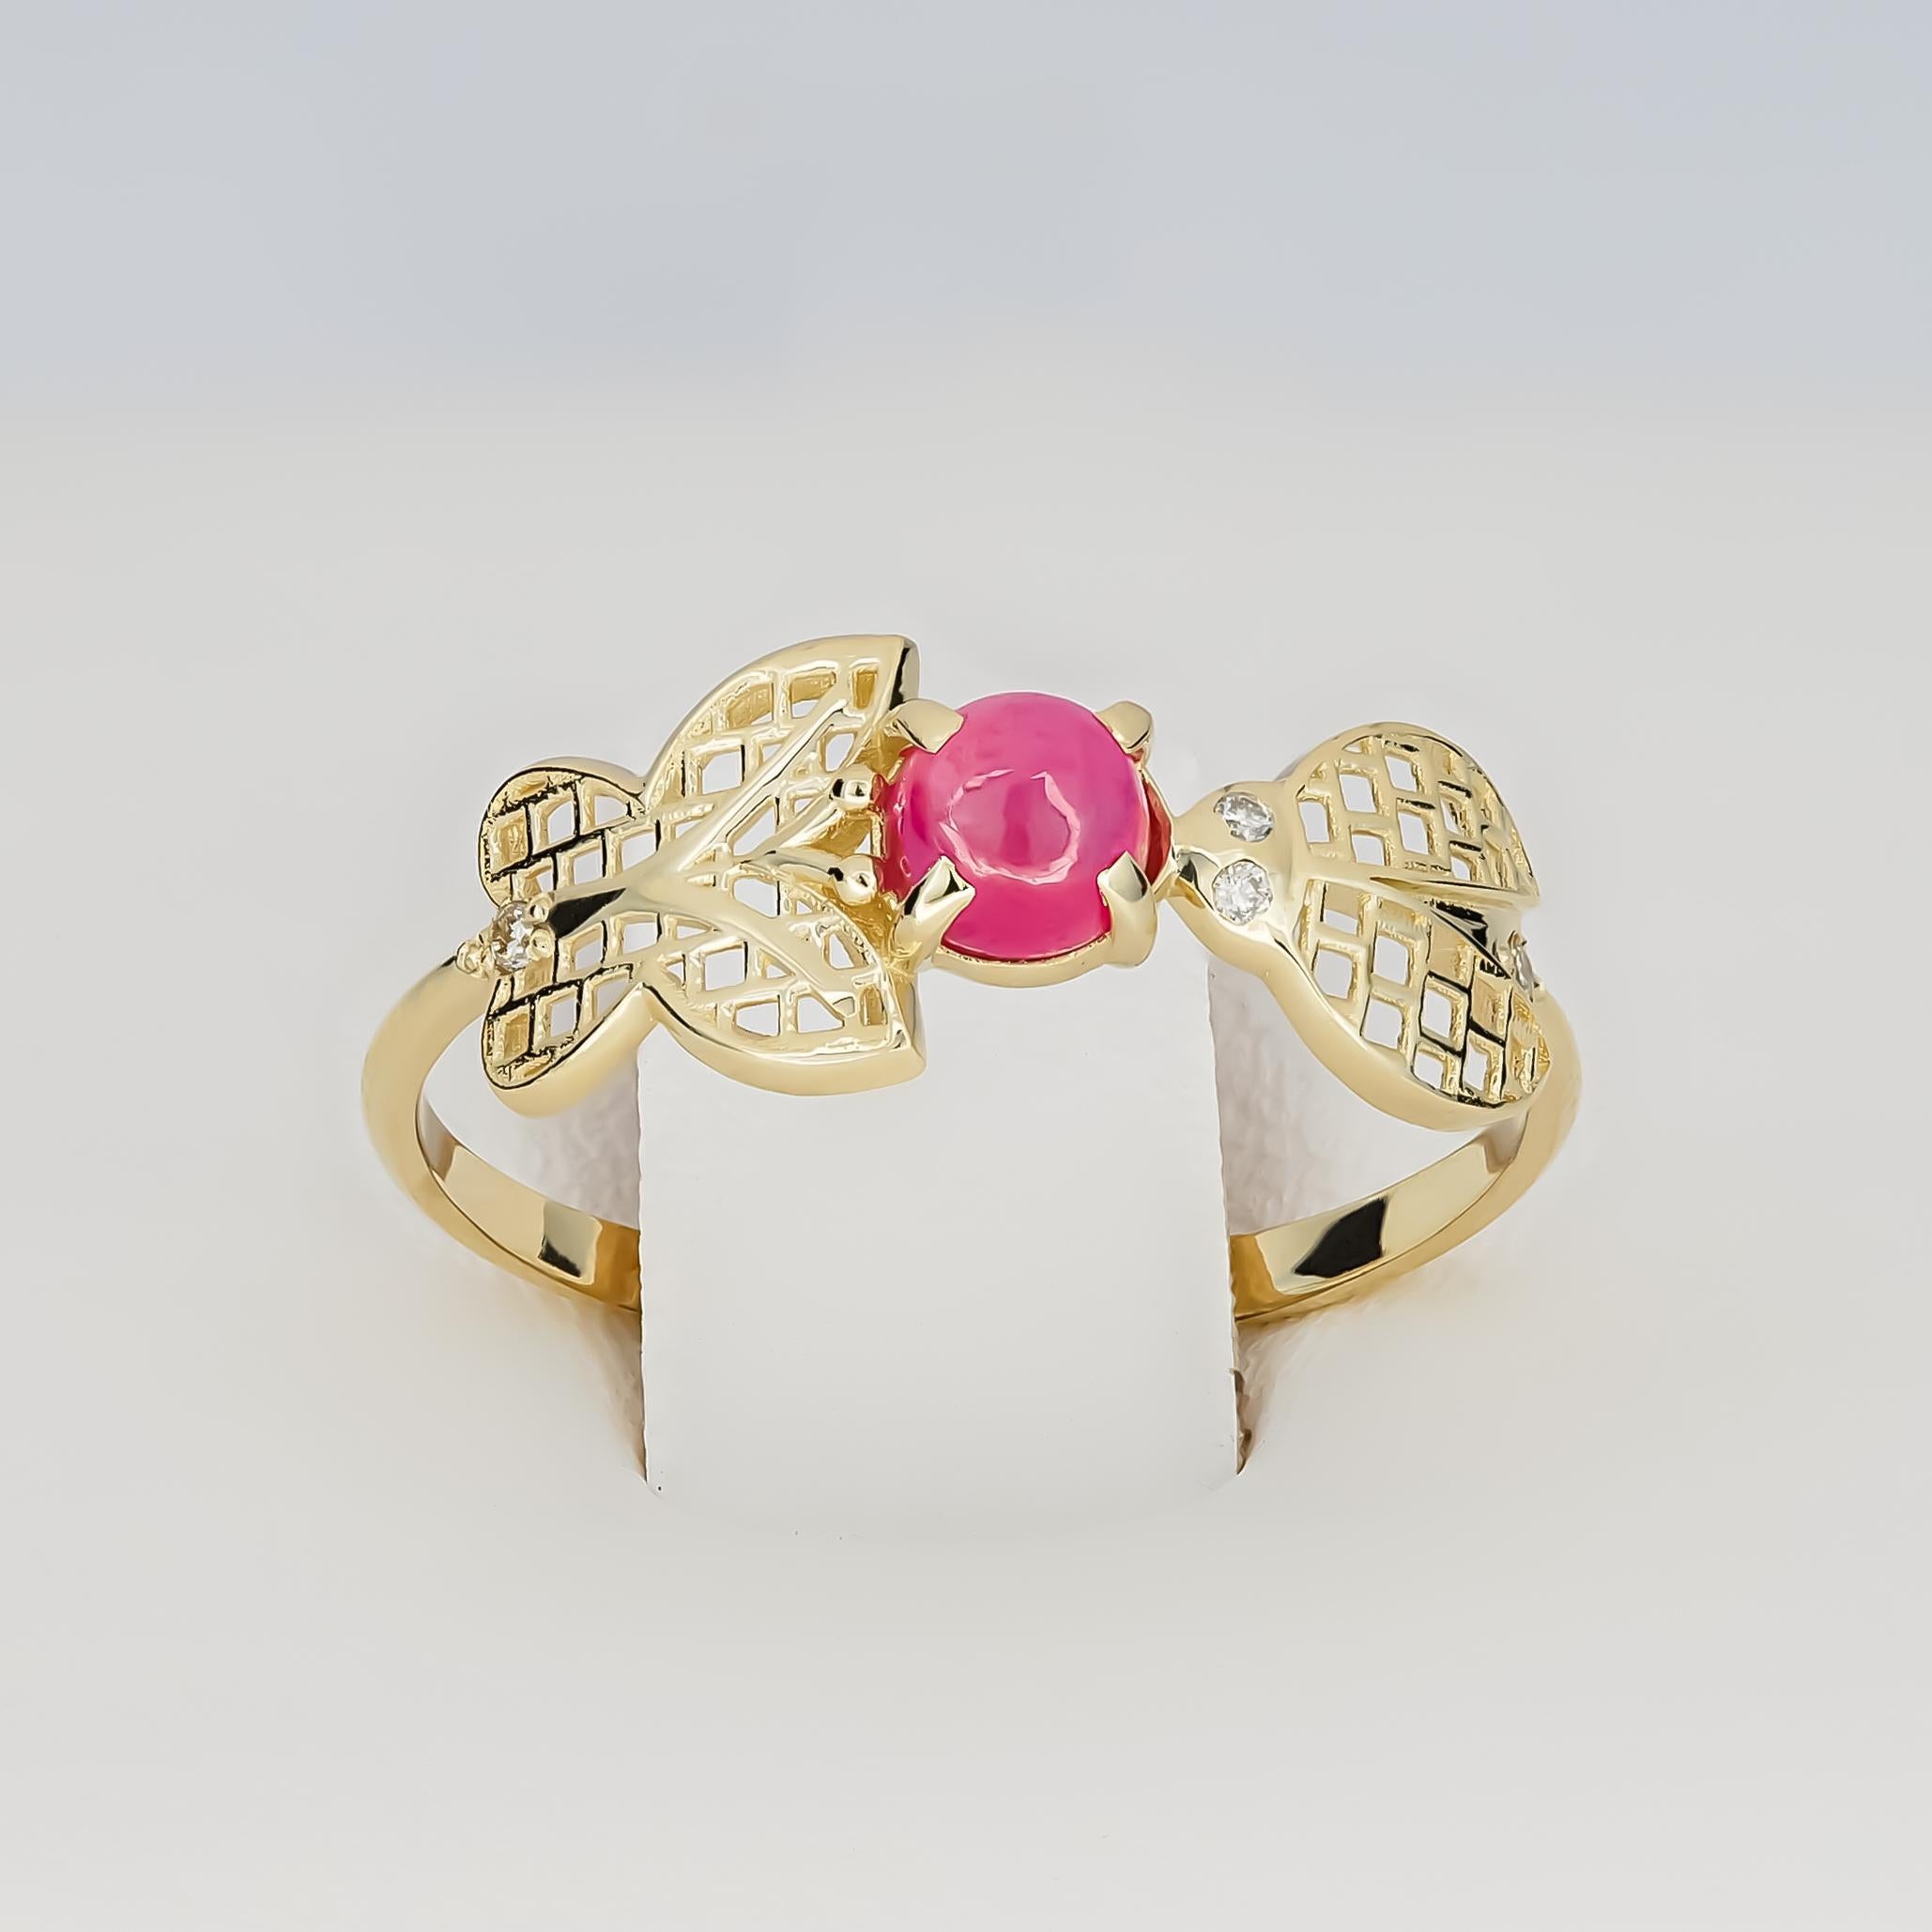 Cabochon 14 Karat Gold Ring with Ruby and Diamonds. July birthstone ruby ring